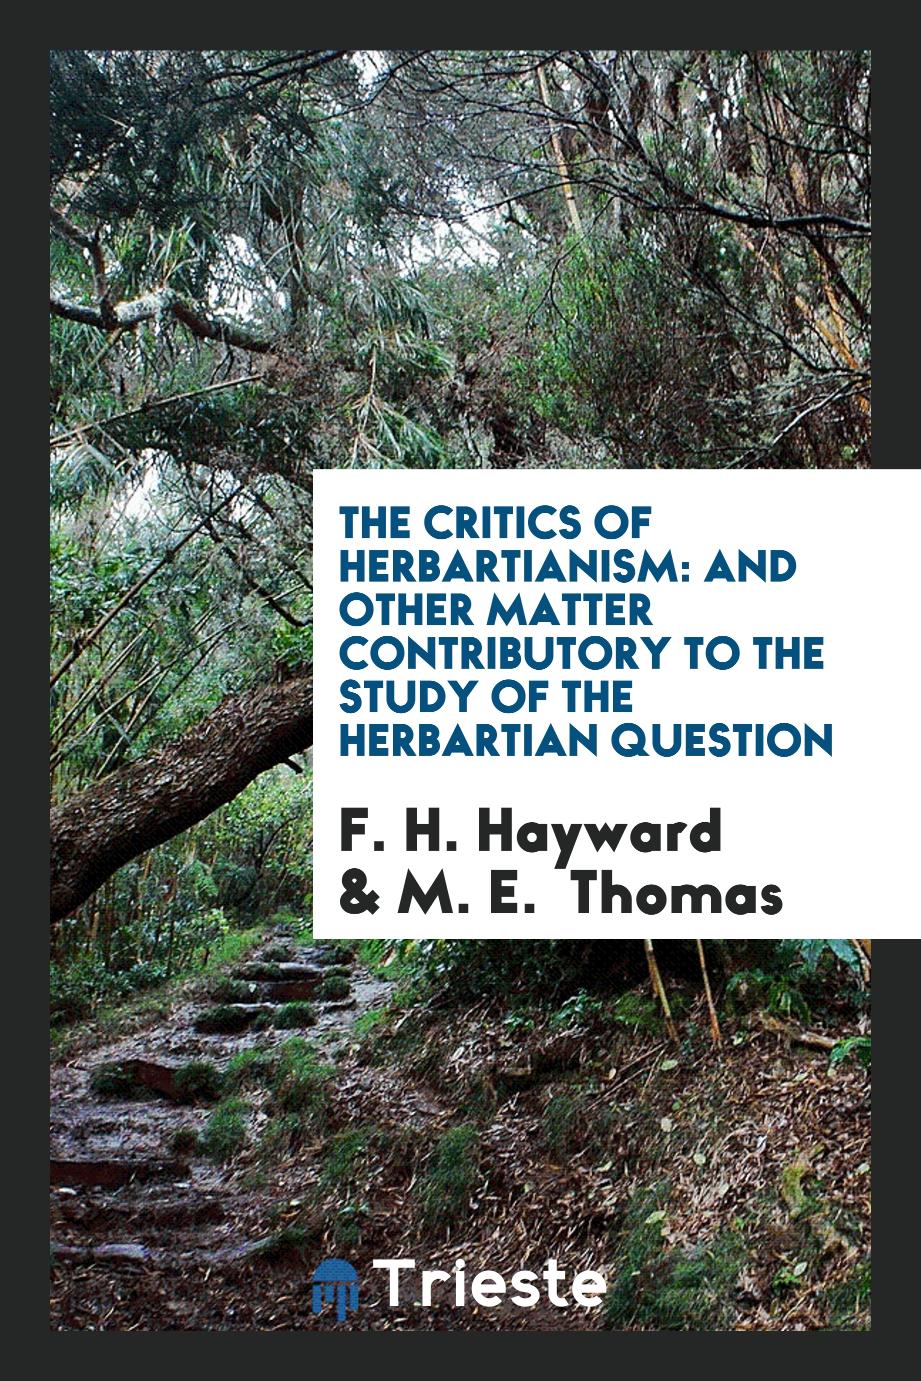 The Critics of Herbartianism: And Other Matter Contributory to the Study of the Herbartian Question